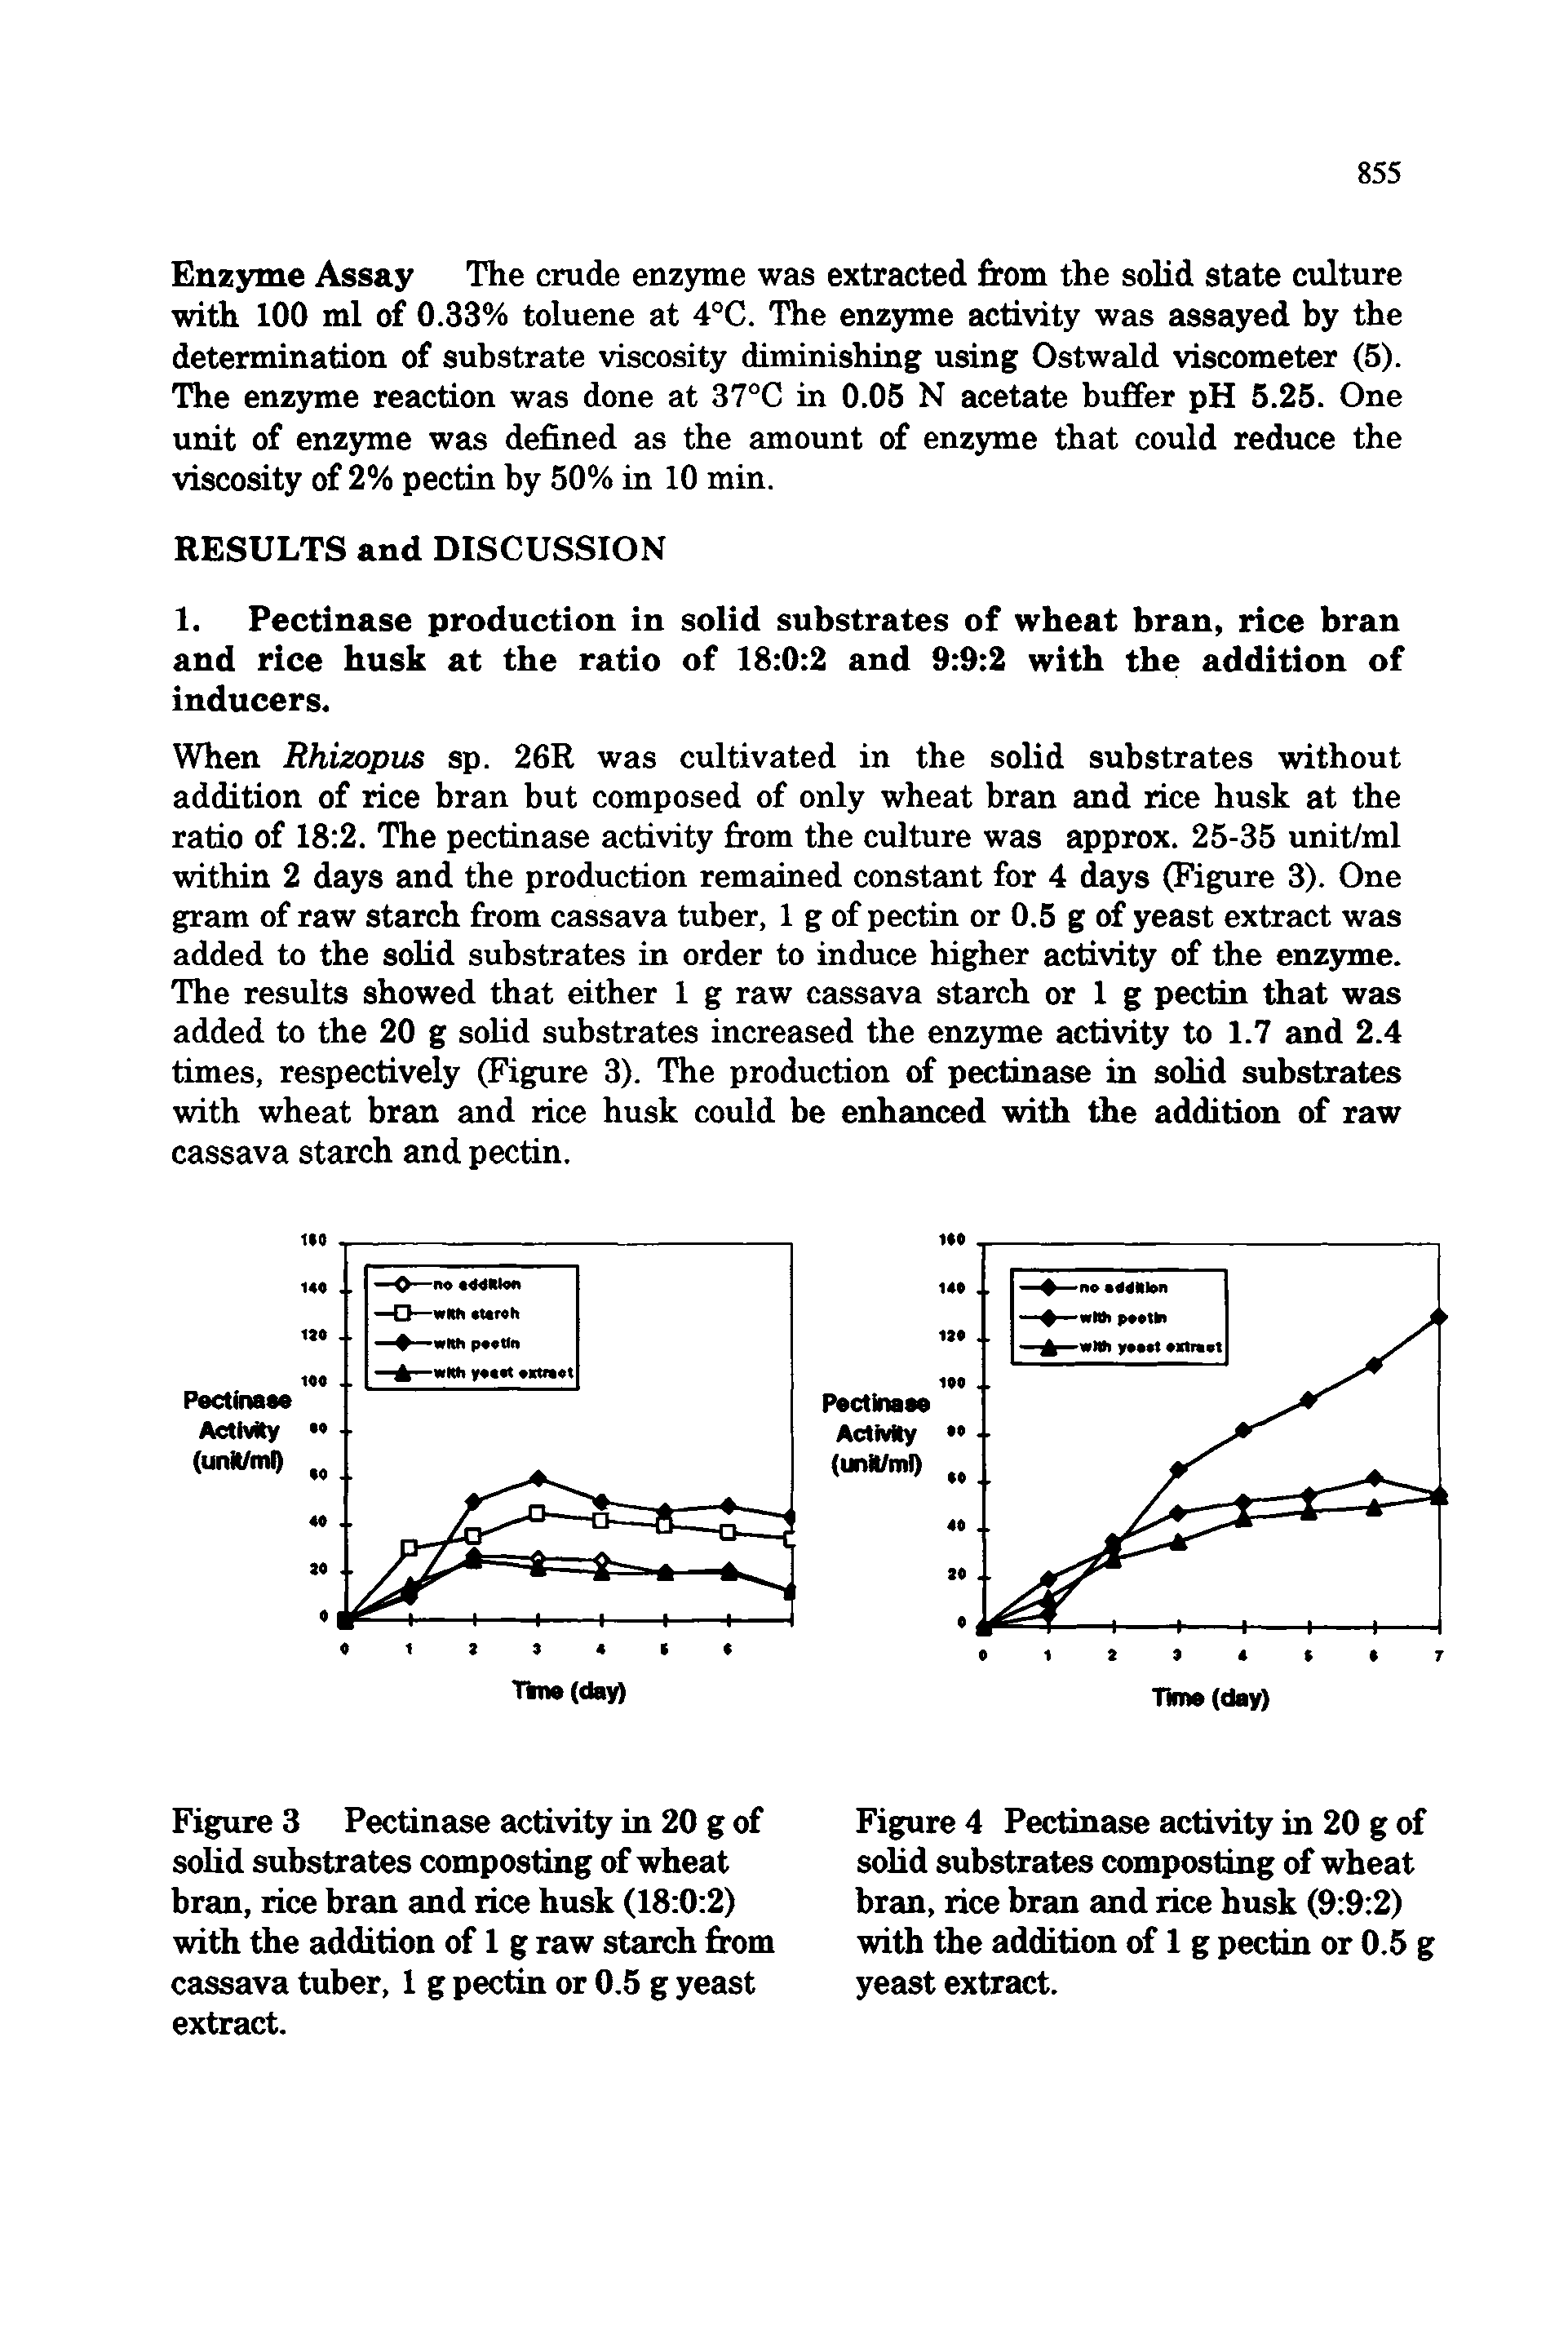 Figure 3 Pectinase activity in 20 g of solid substrates composting of wheat bran, rice bran and rice husk (18 0 2) with the addition of 1 g raw starch from cassava tuber, 1 g pectin or 0.5 g yeast extract.